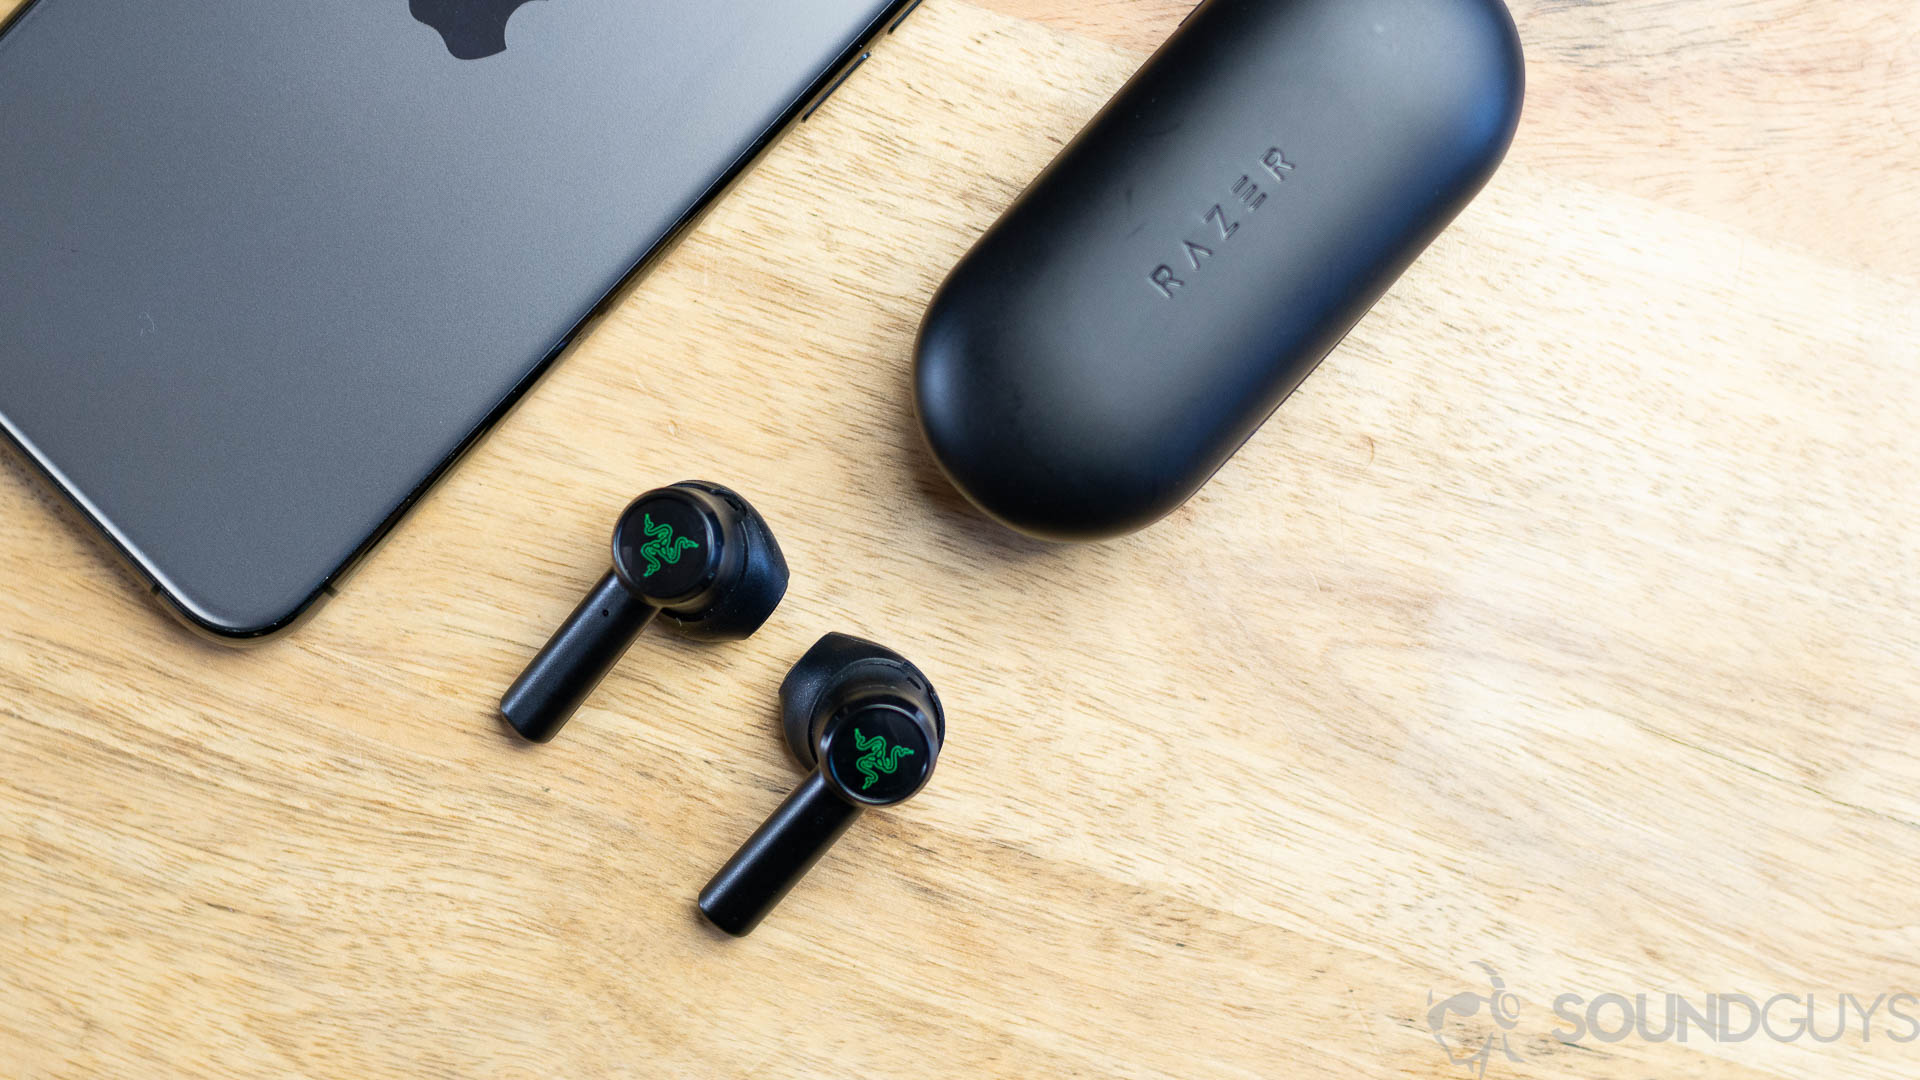 The Razer Hammerhead true wireless earbuds next to iPhone 11 Pro on a wooden surface.